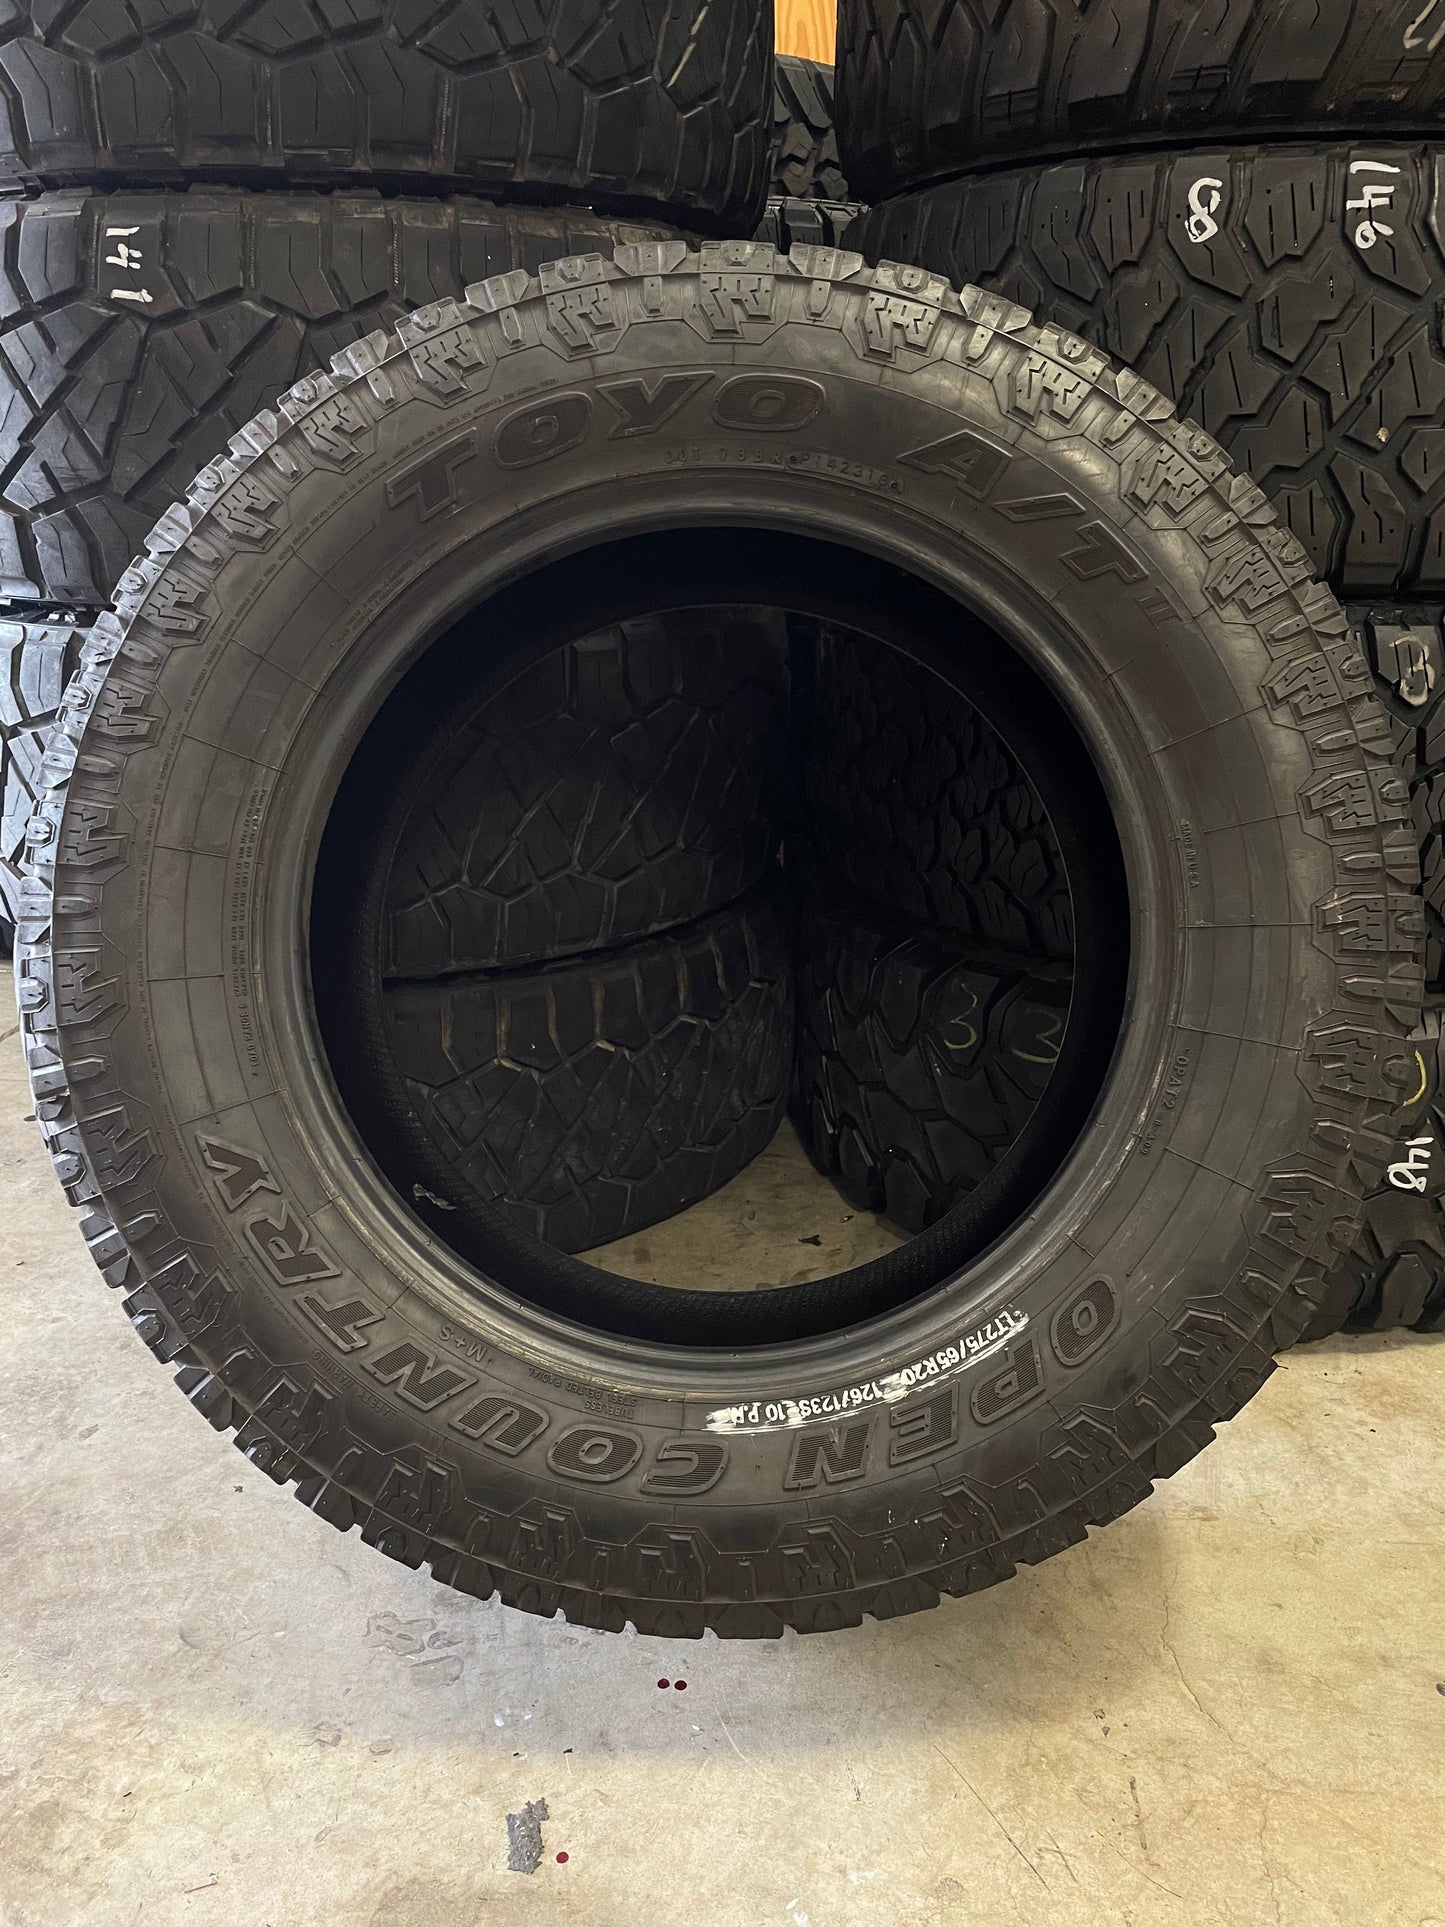 SINGLE 275/65R20 Toyo Open Country 126/123 S E - Used Tires